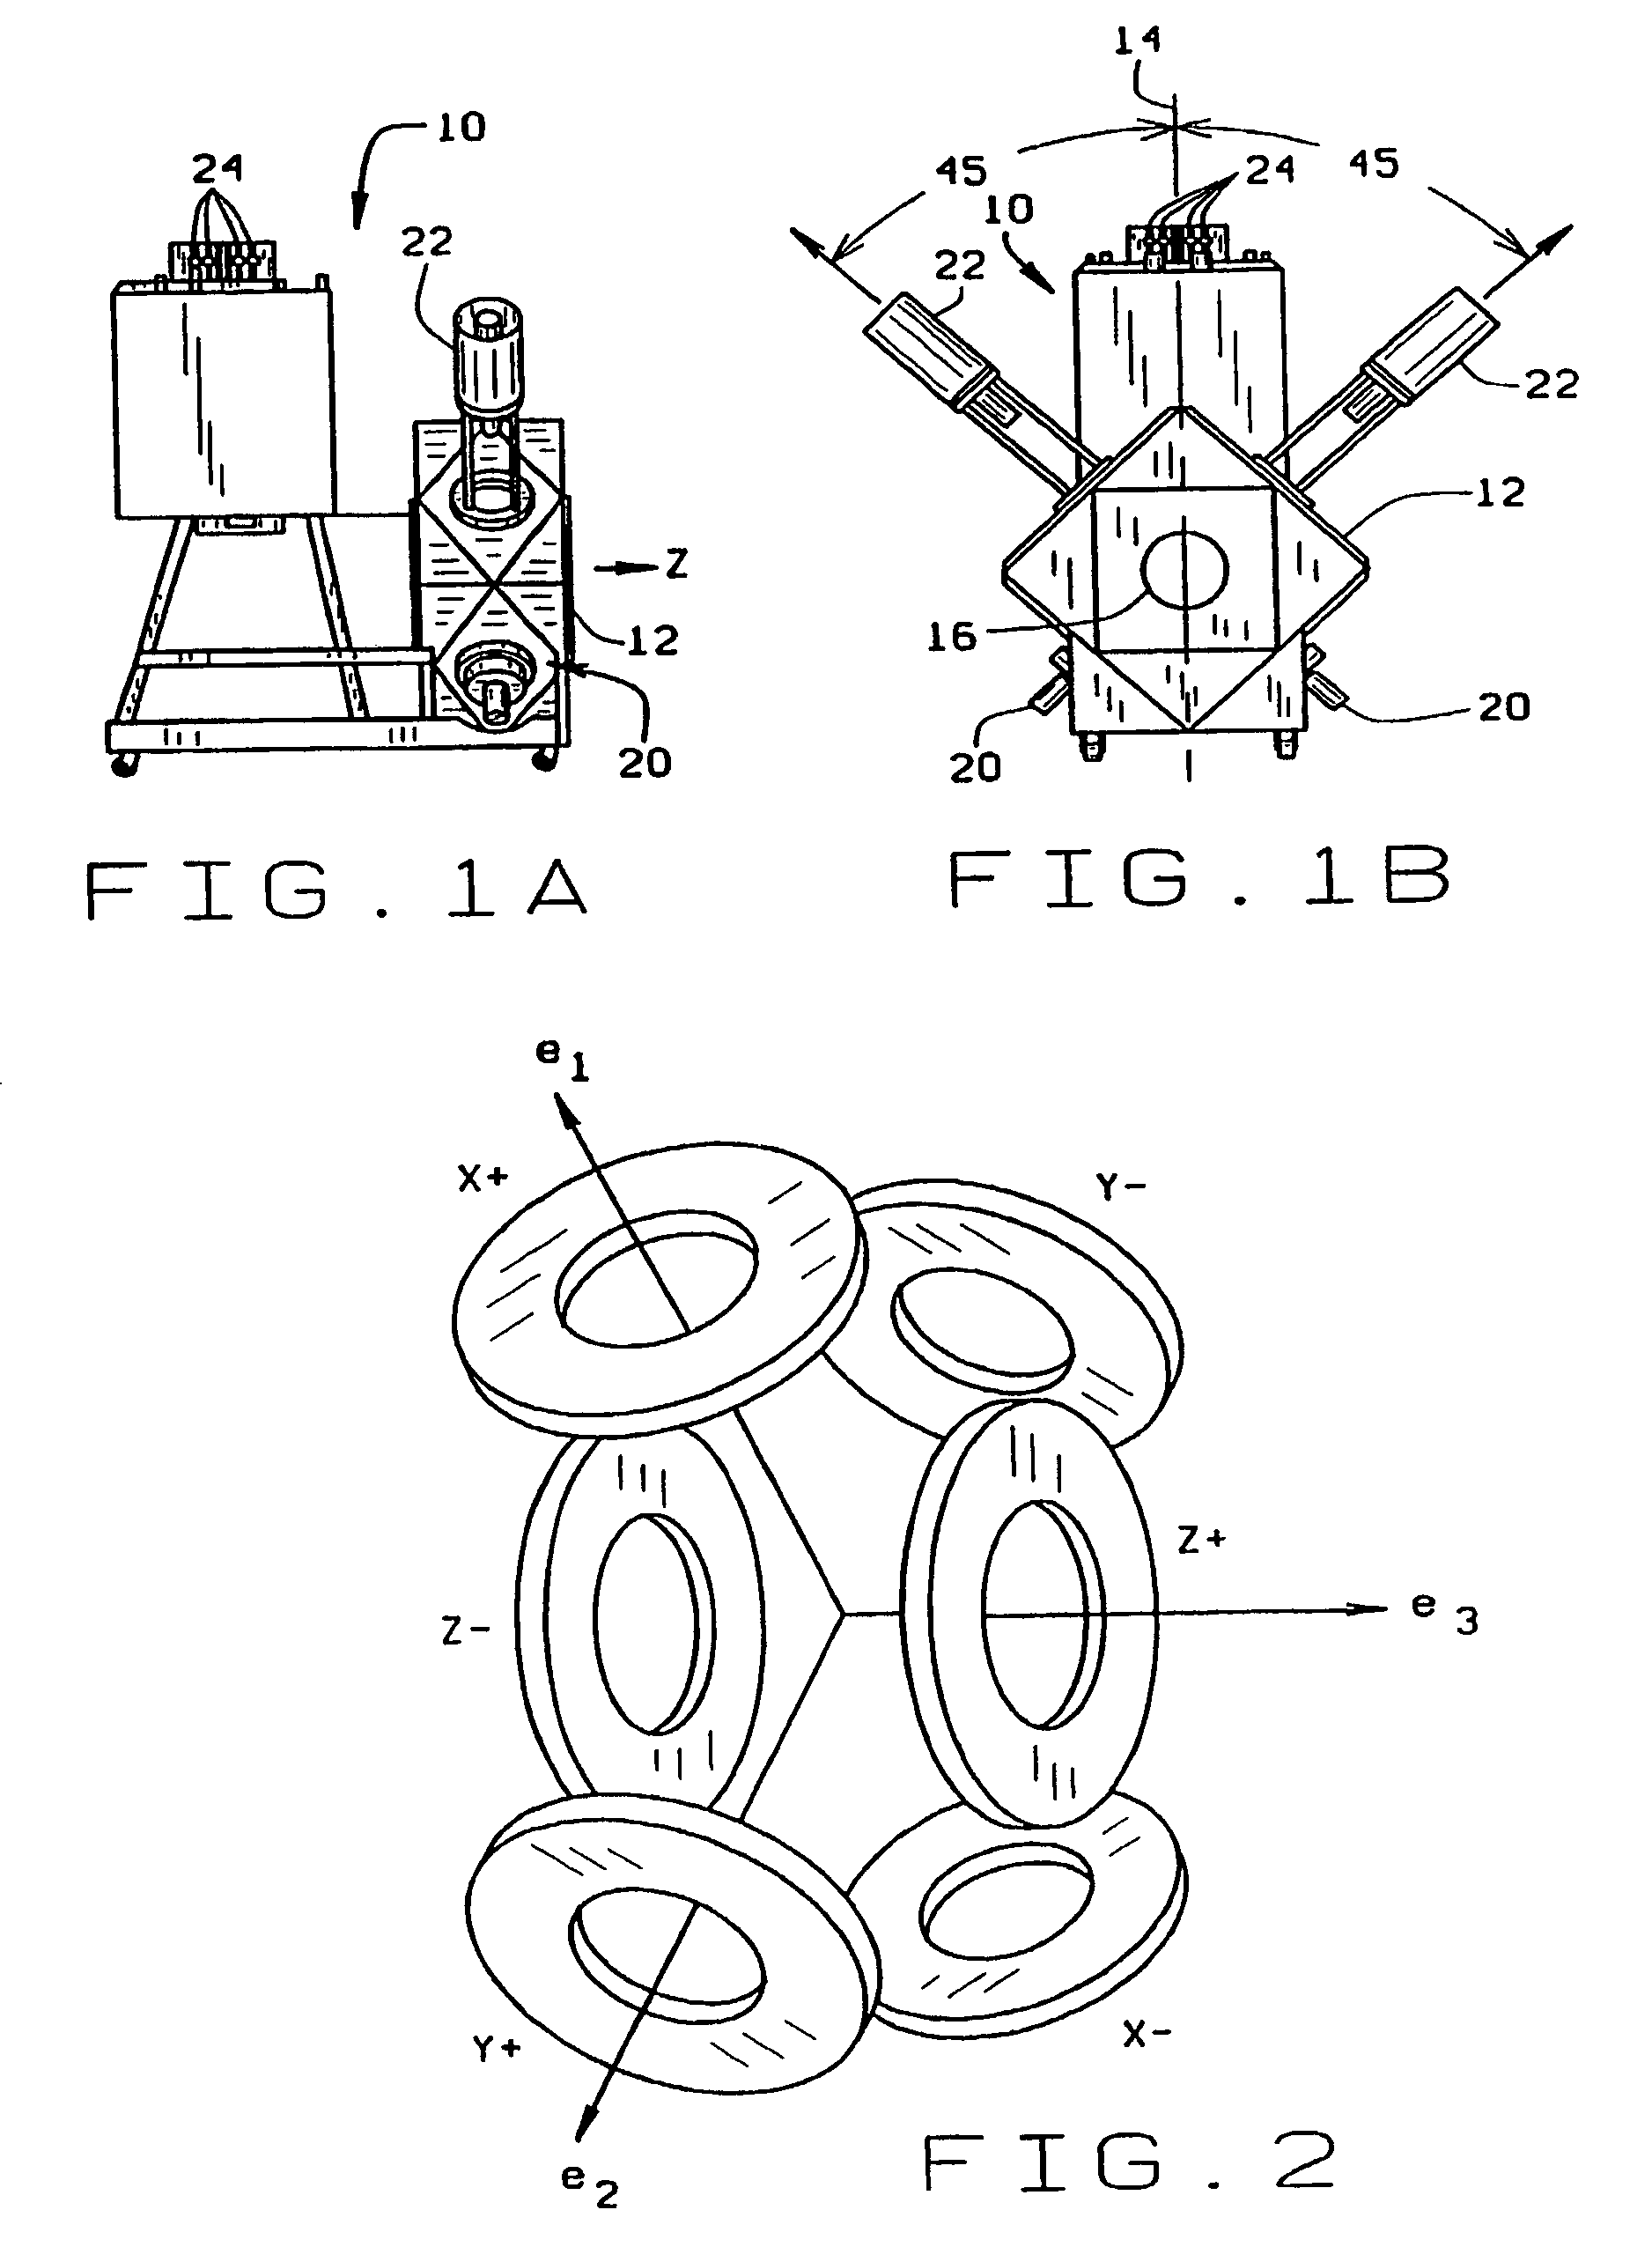 Method and apparatus for magnetically controlling motion direction of a mechanically pushed catheter